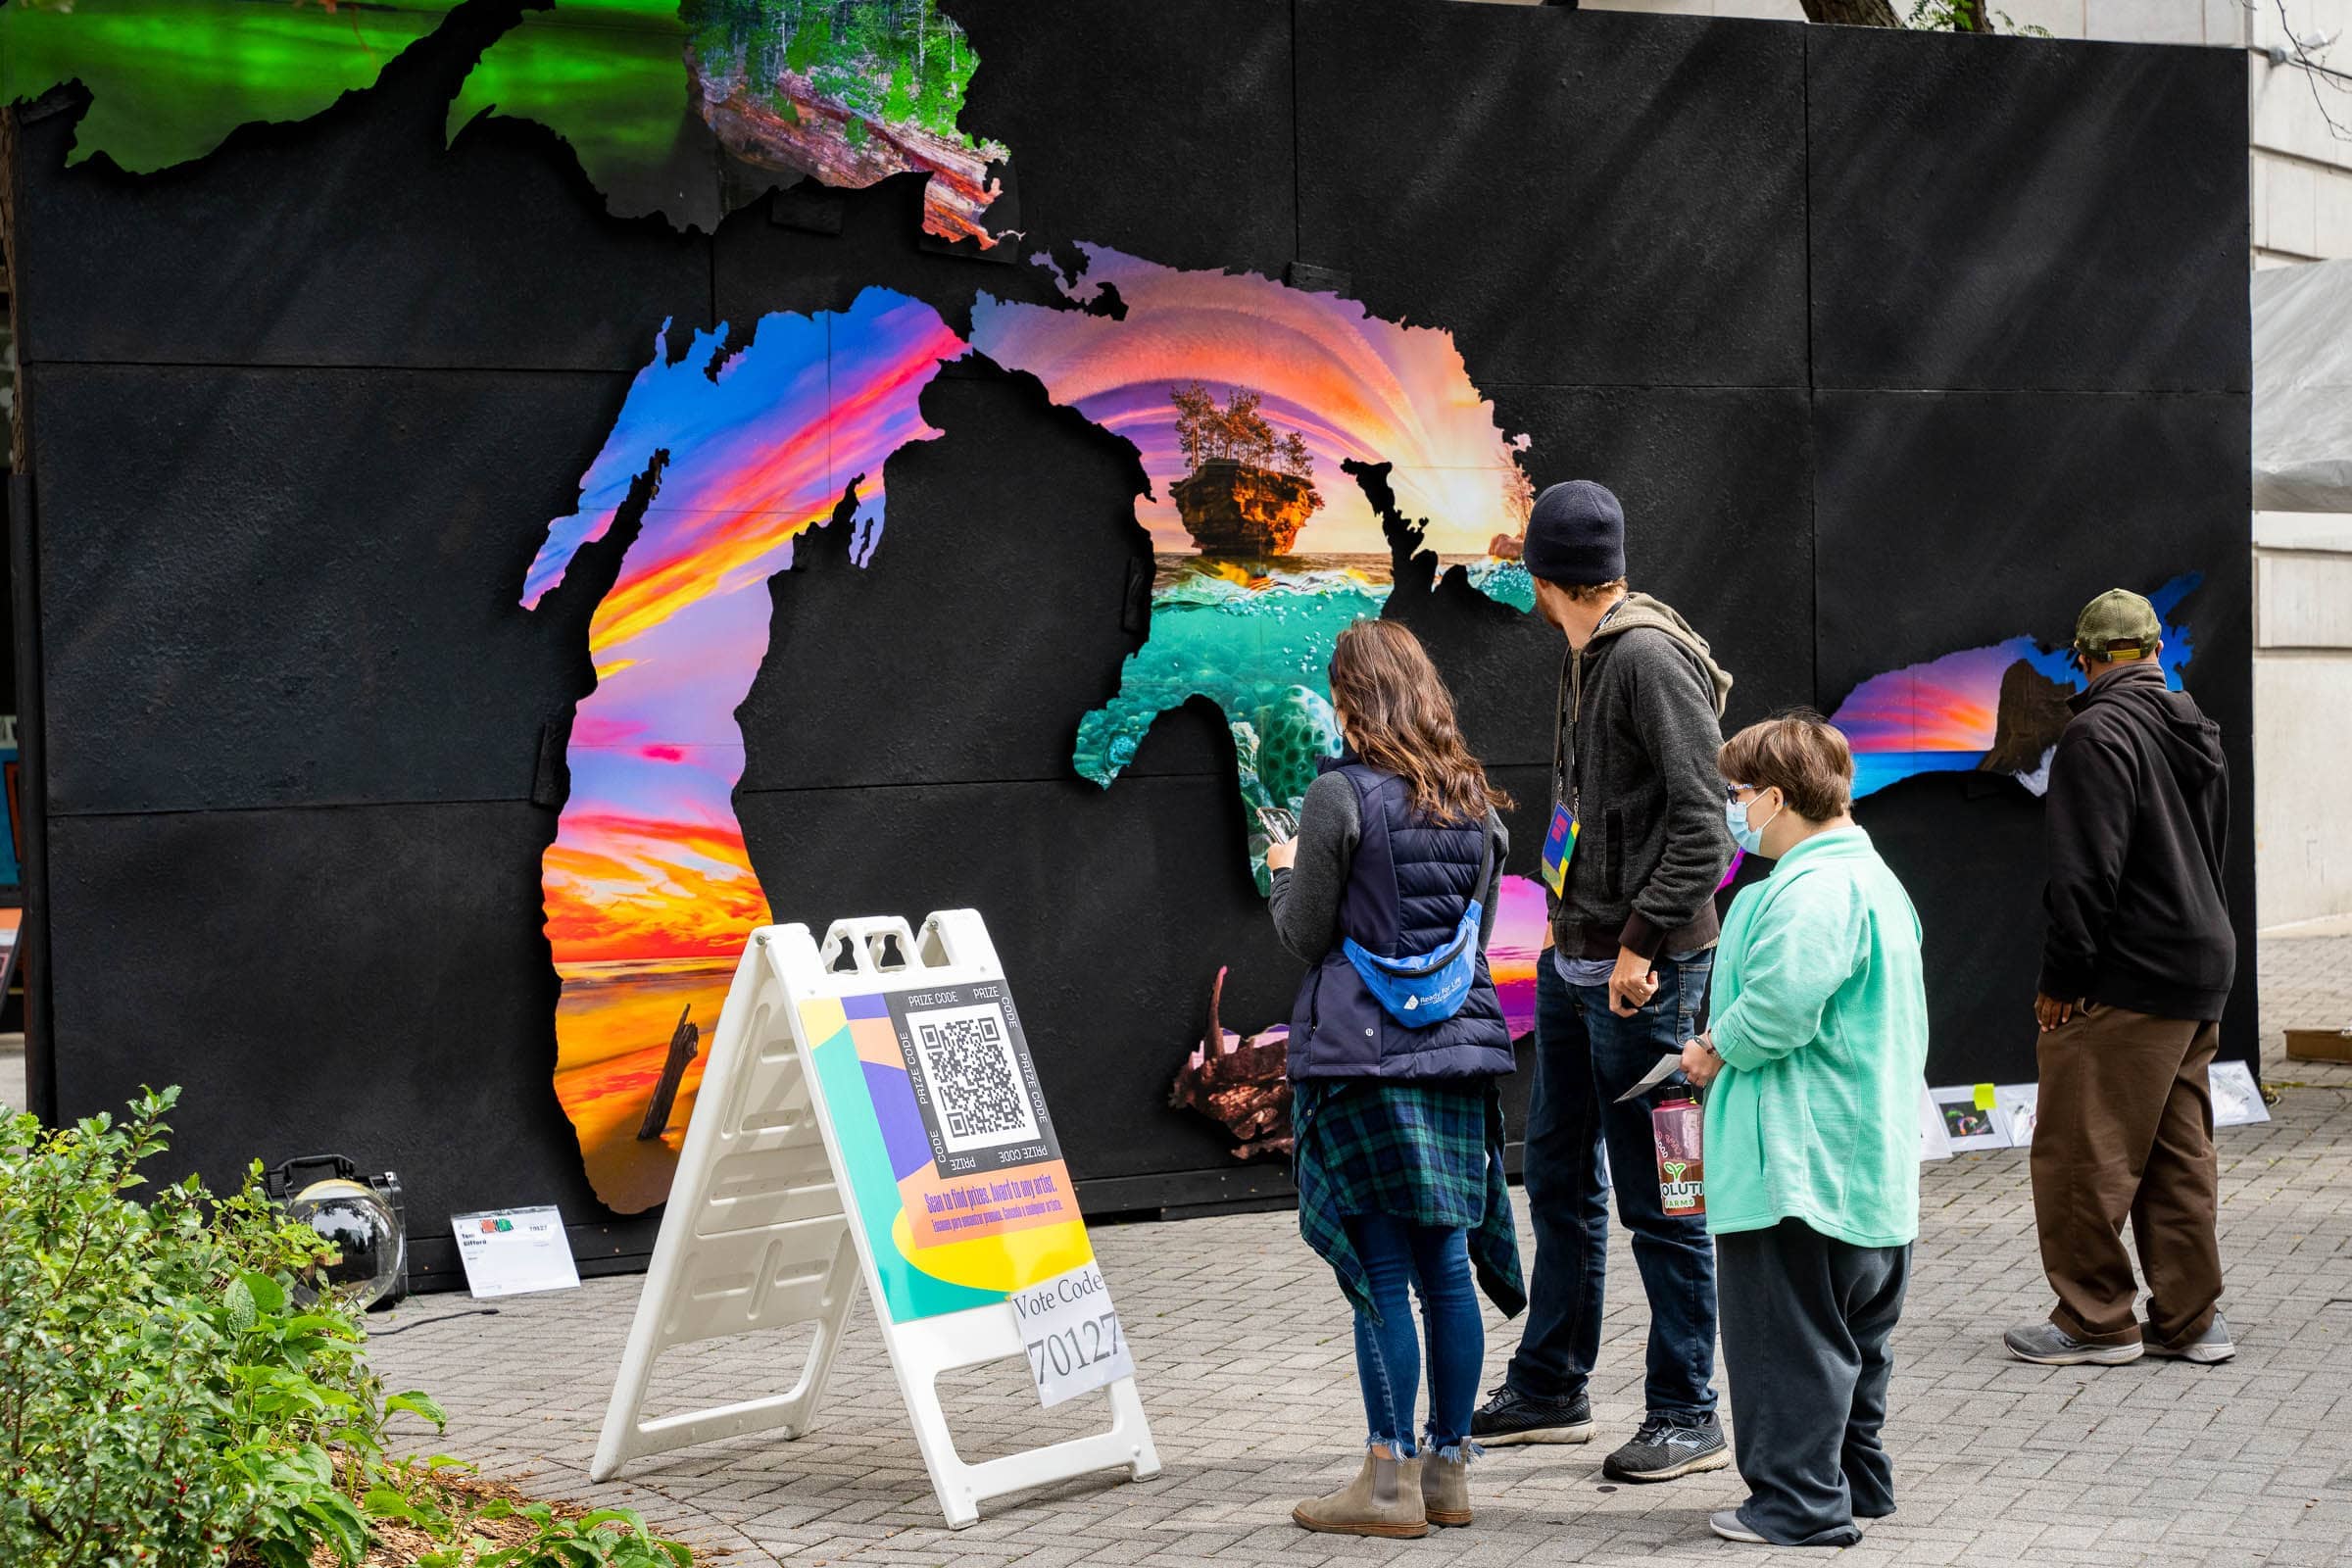 World's largest art competition ArtPrize underway in Grand Rapids